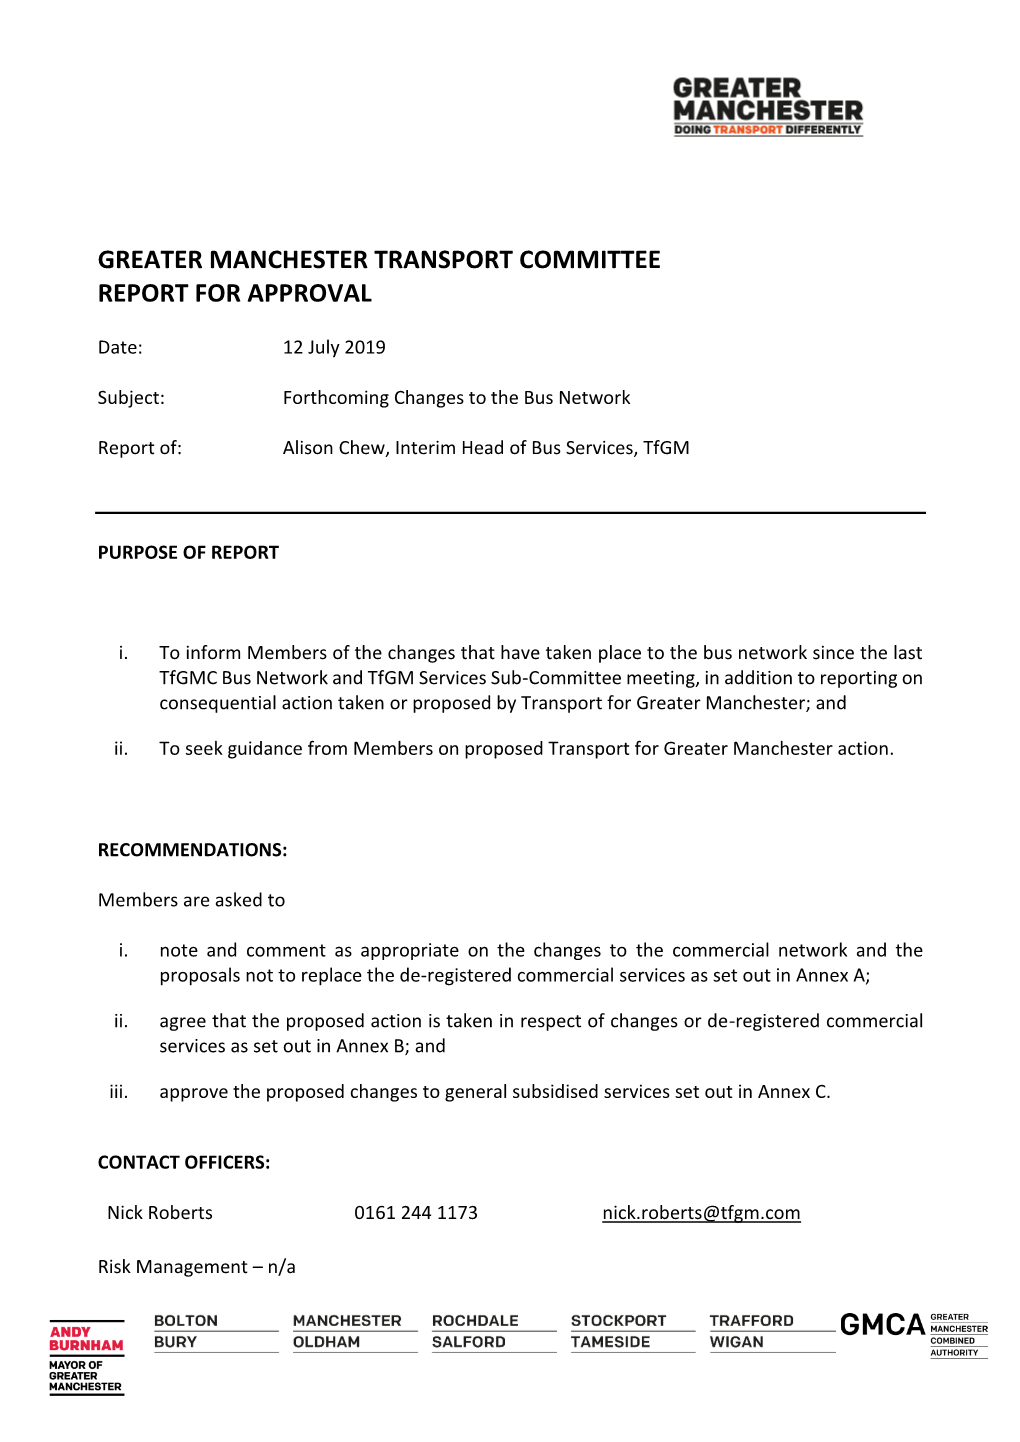 Greater Manchester Transport Committee Report for Approval